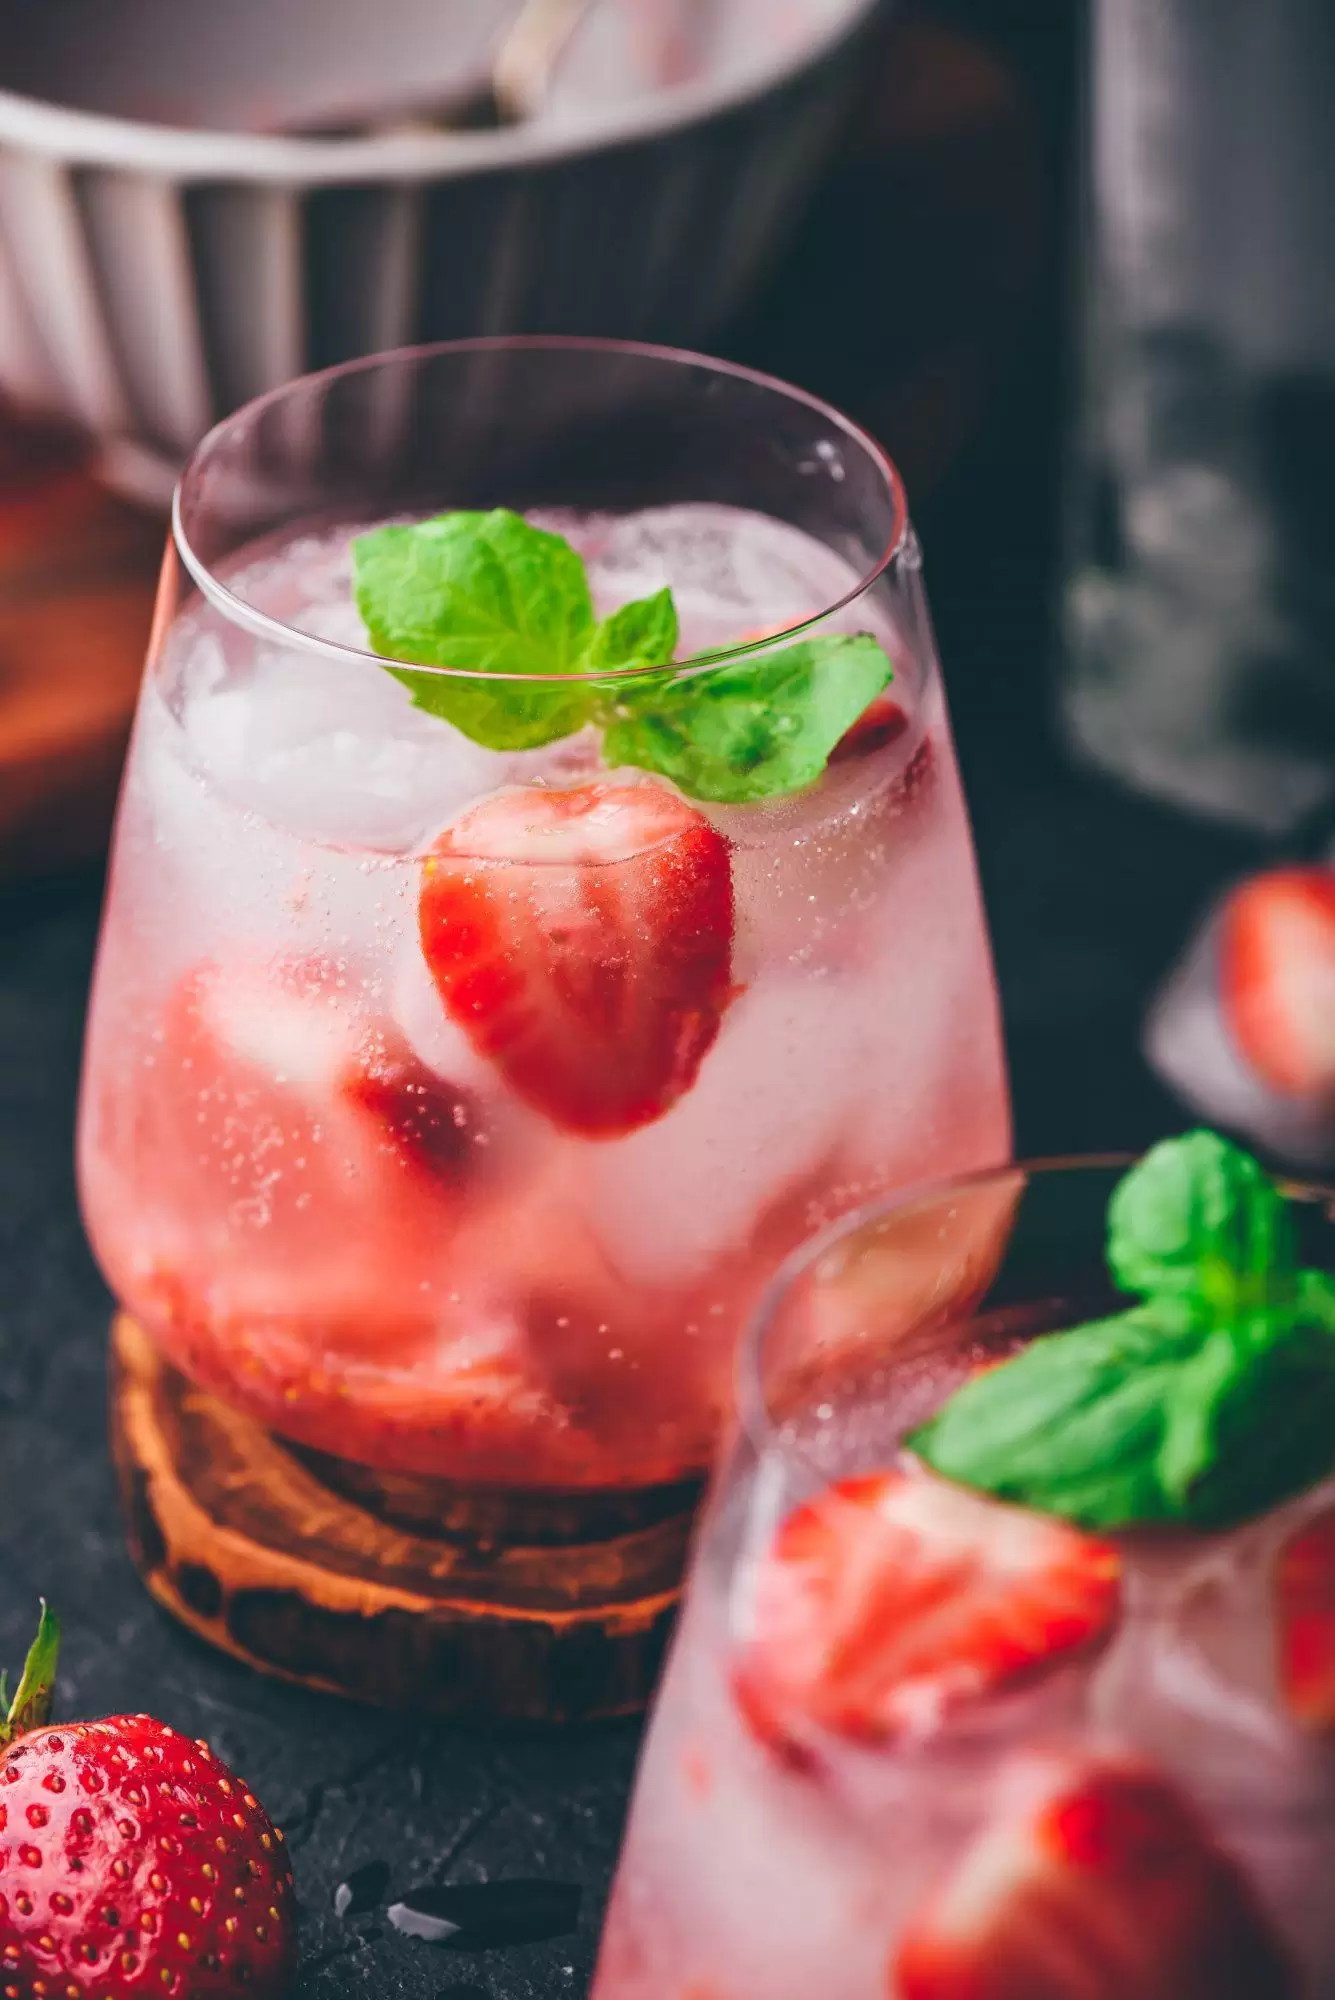 cocktails-with-strawberry-gin-and-tonic-7RZ6QLV-min